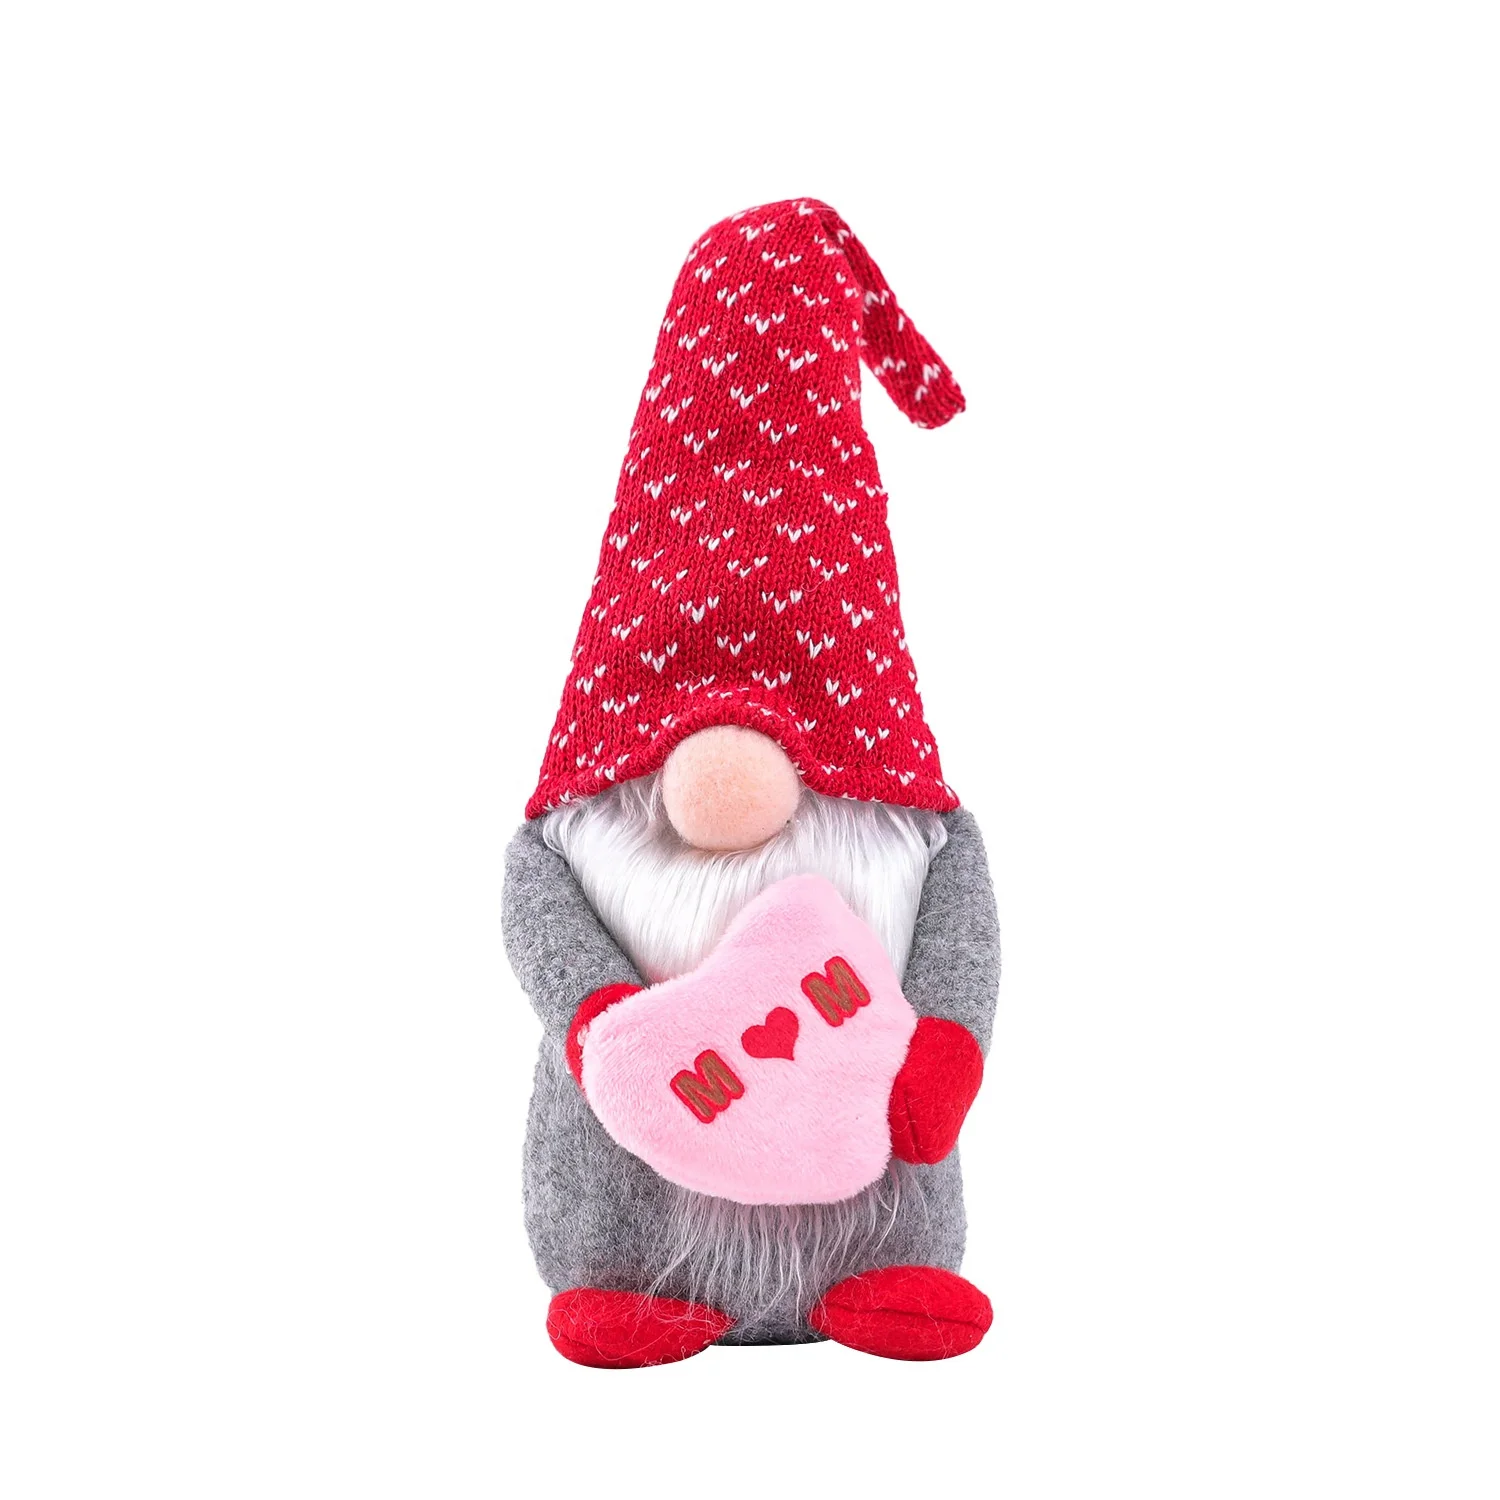 DTgirl Swedish Handmade Plush Gnomes Christmas Gnome Home Holiday Decor Ornaments Adorable Lucky Valentine Easter Thanks Giving Day Xmas Gift Stuffed Gnomes Gray